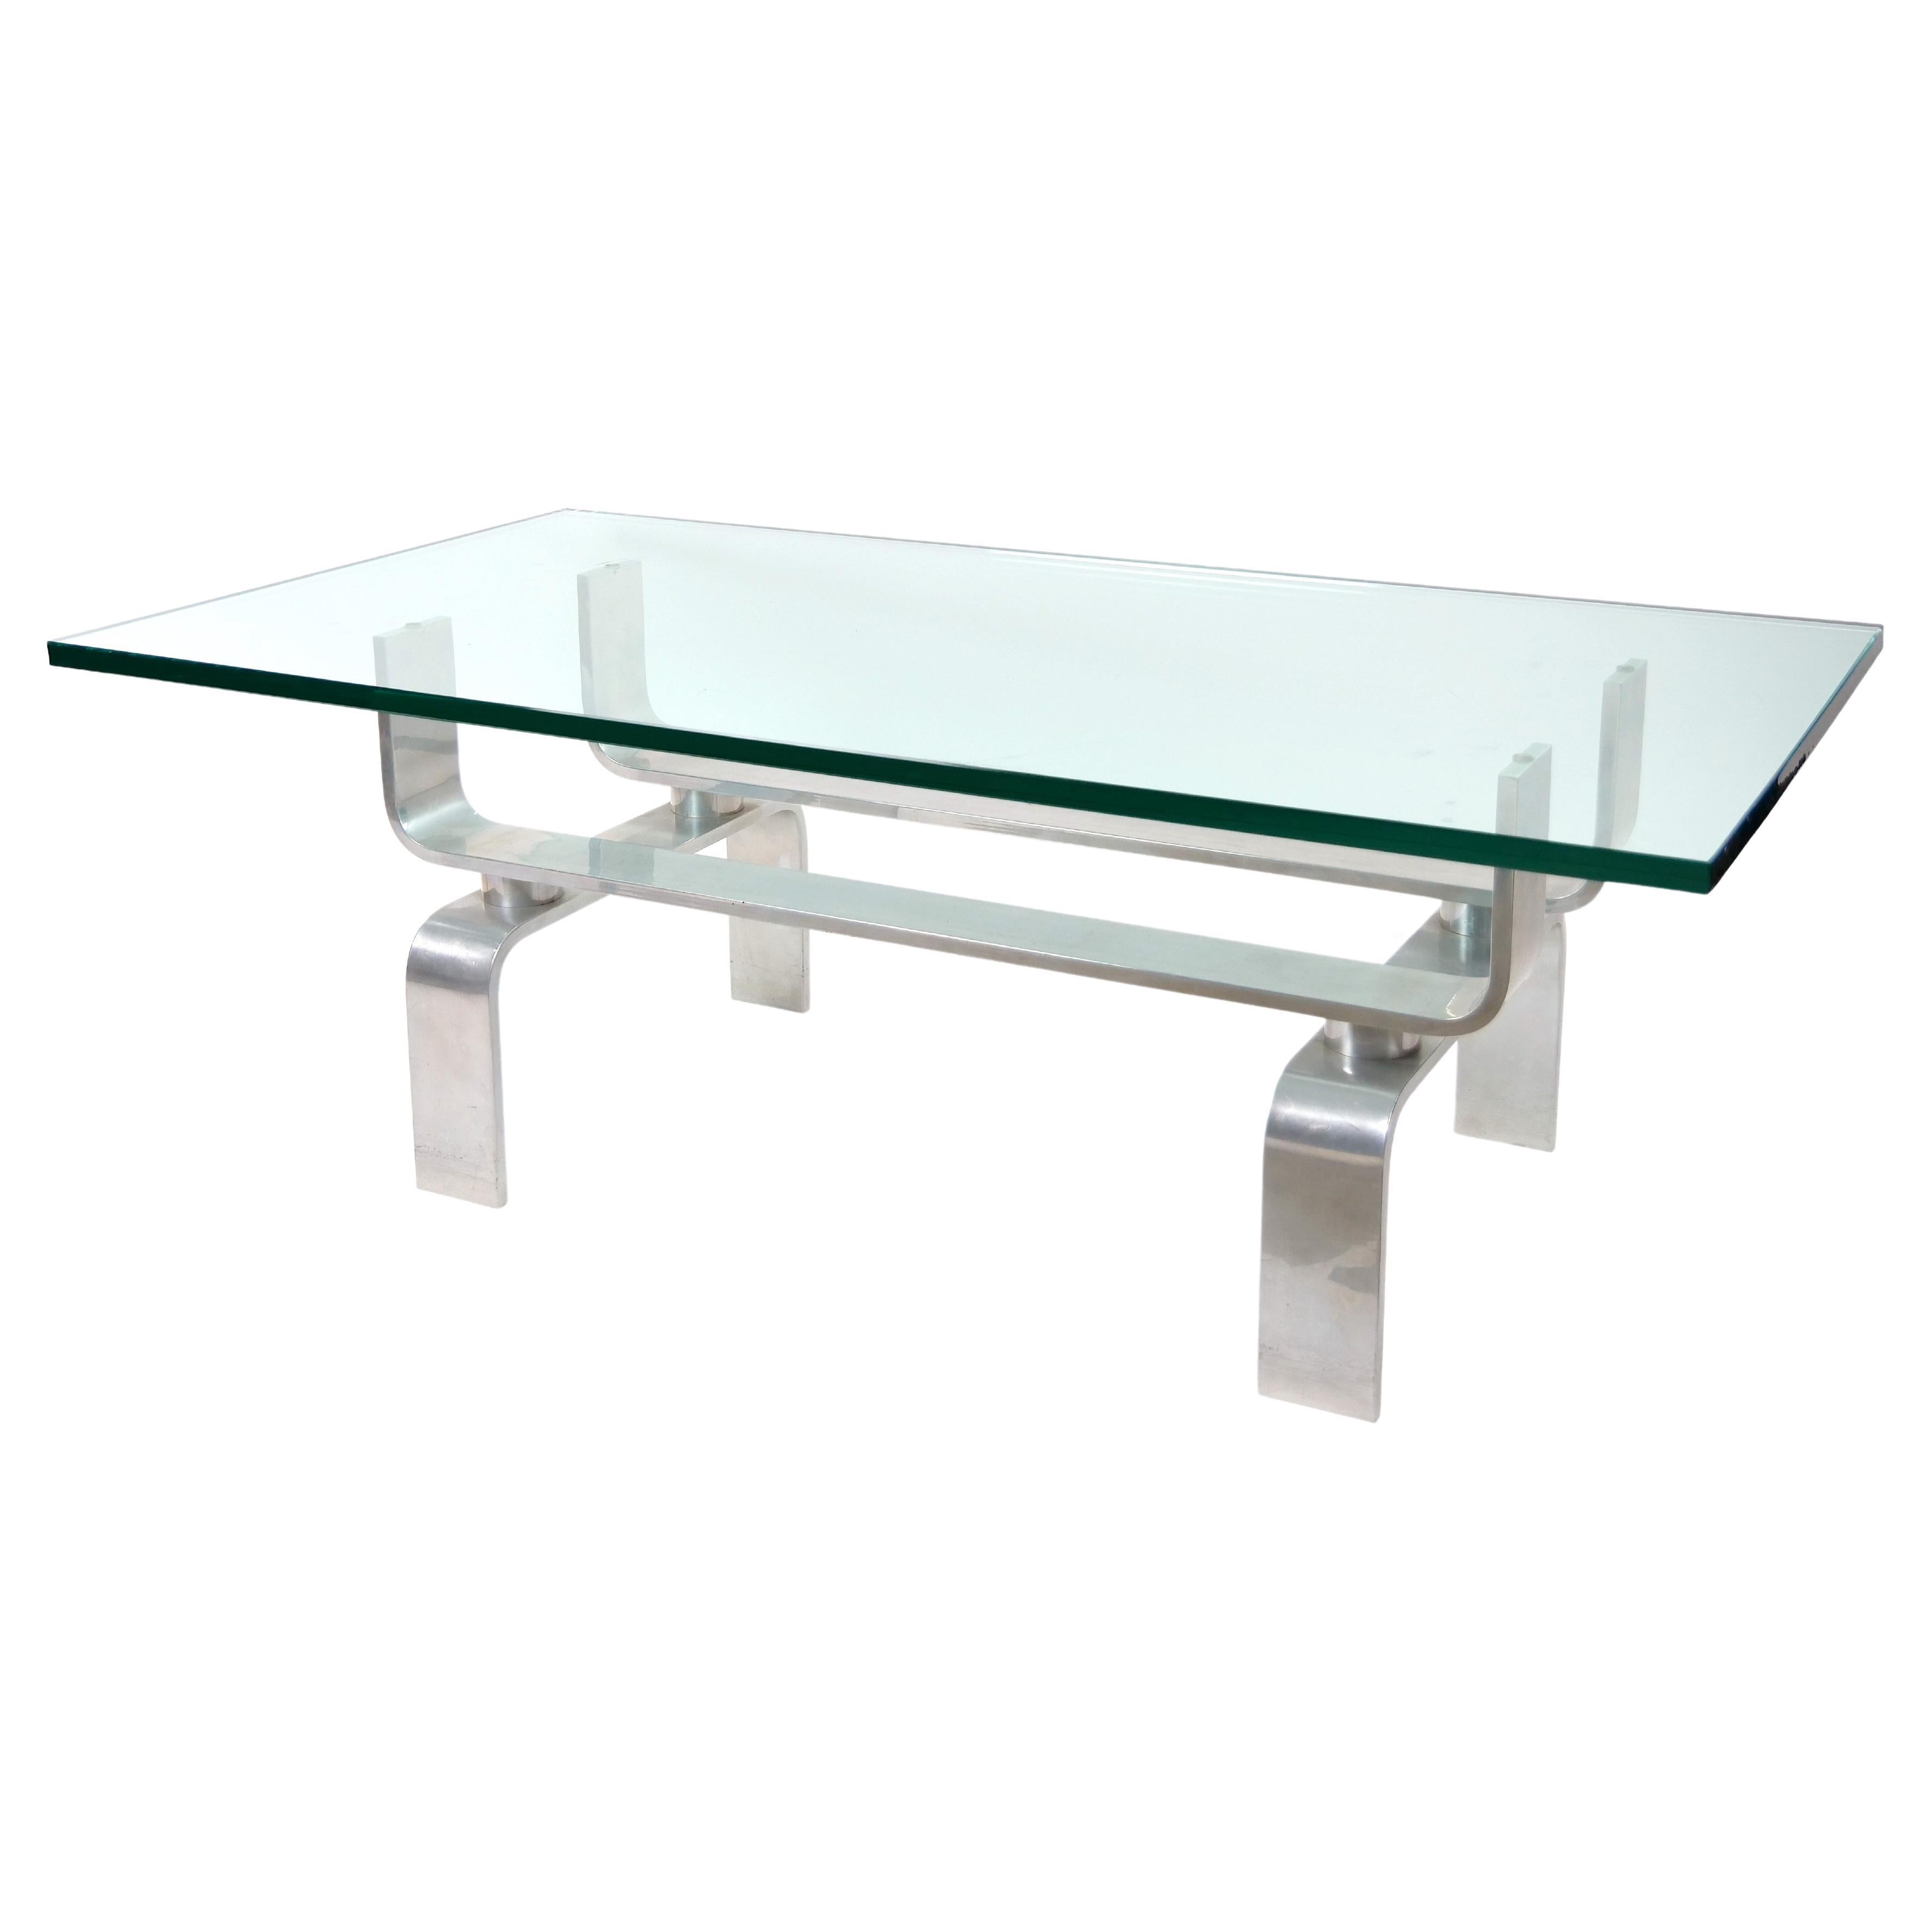 Mid-Century Modern Aluminum Frame Base / Glass Top Coffee Table For Sale